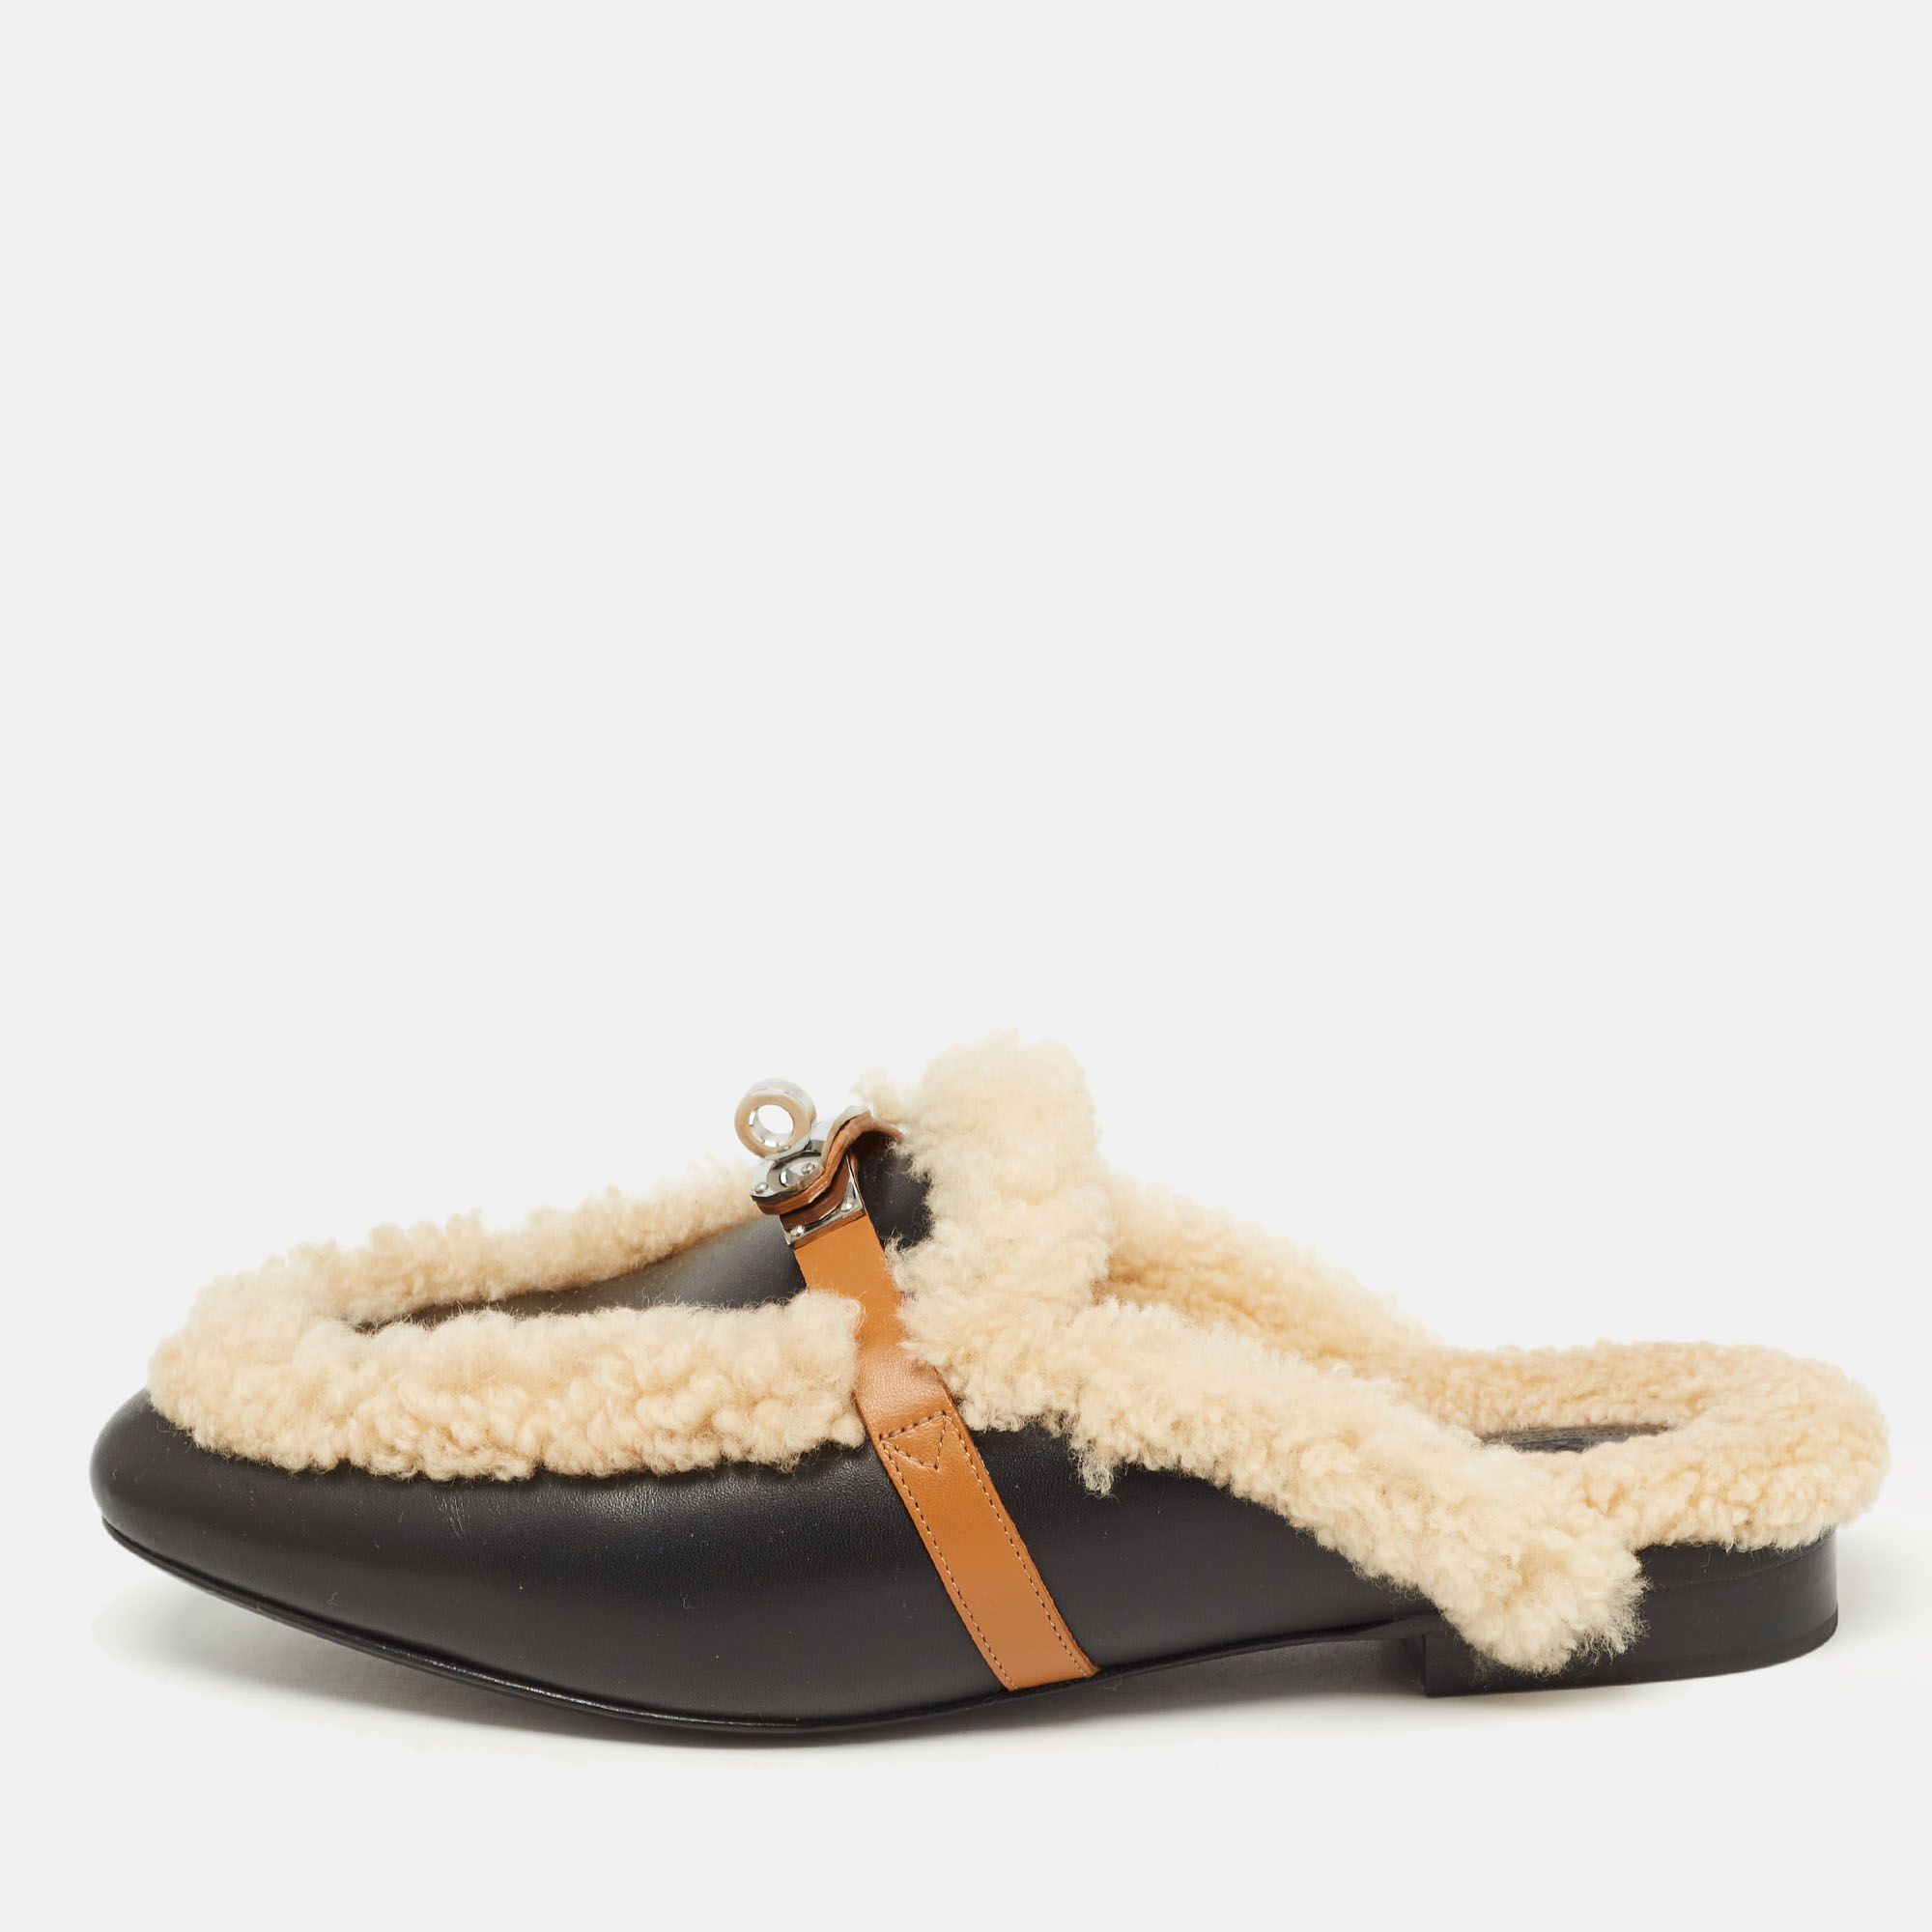 Hermes Black/Beige Leather And Shearling Fur Oz Flat Mules Size 40